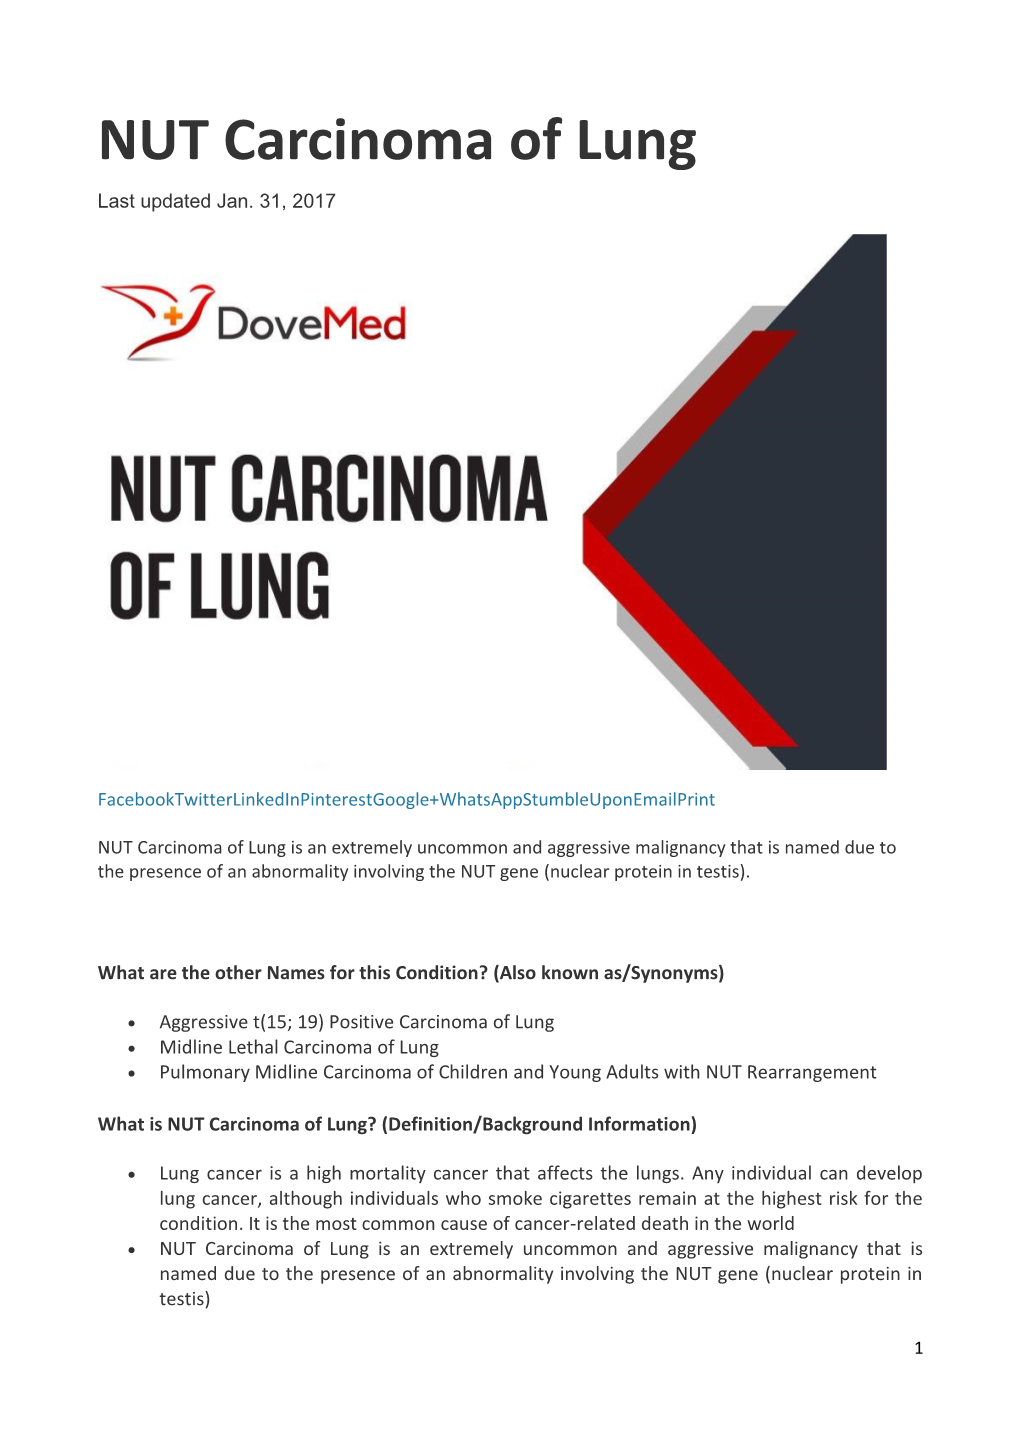 NUT Carcinoma of Lung Last Updated Jan